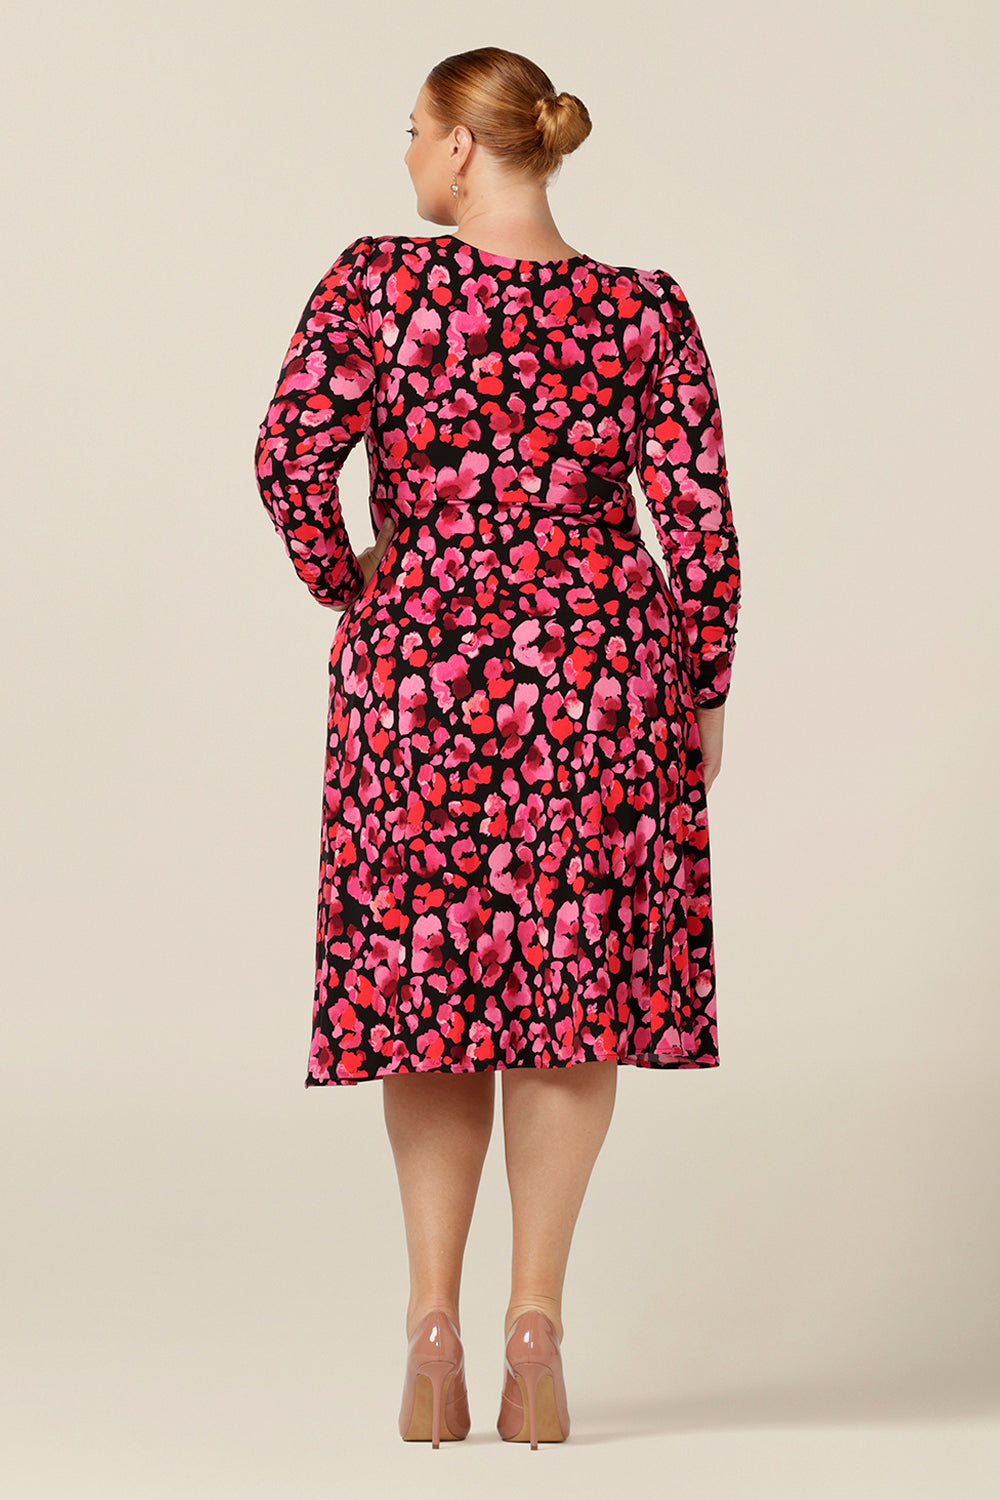 back view of a printed jersey dress in size 18, with red poppy floral pattern. This empire line dress has a V neck, long sleeves and knee length skirt. 